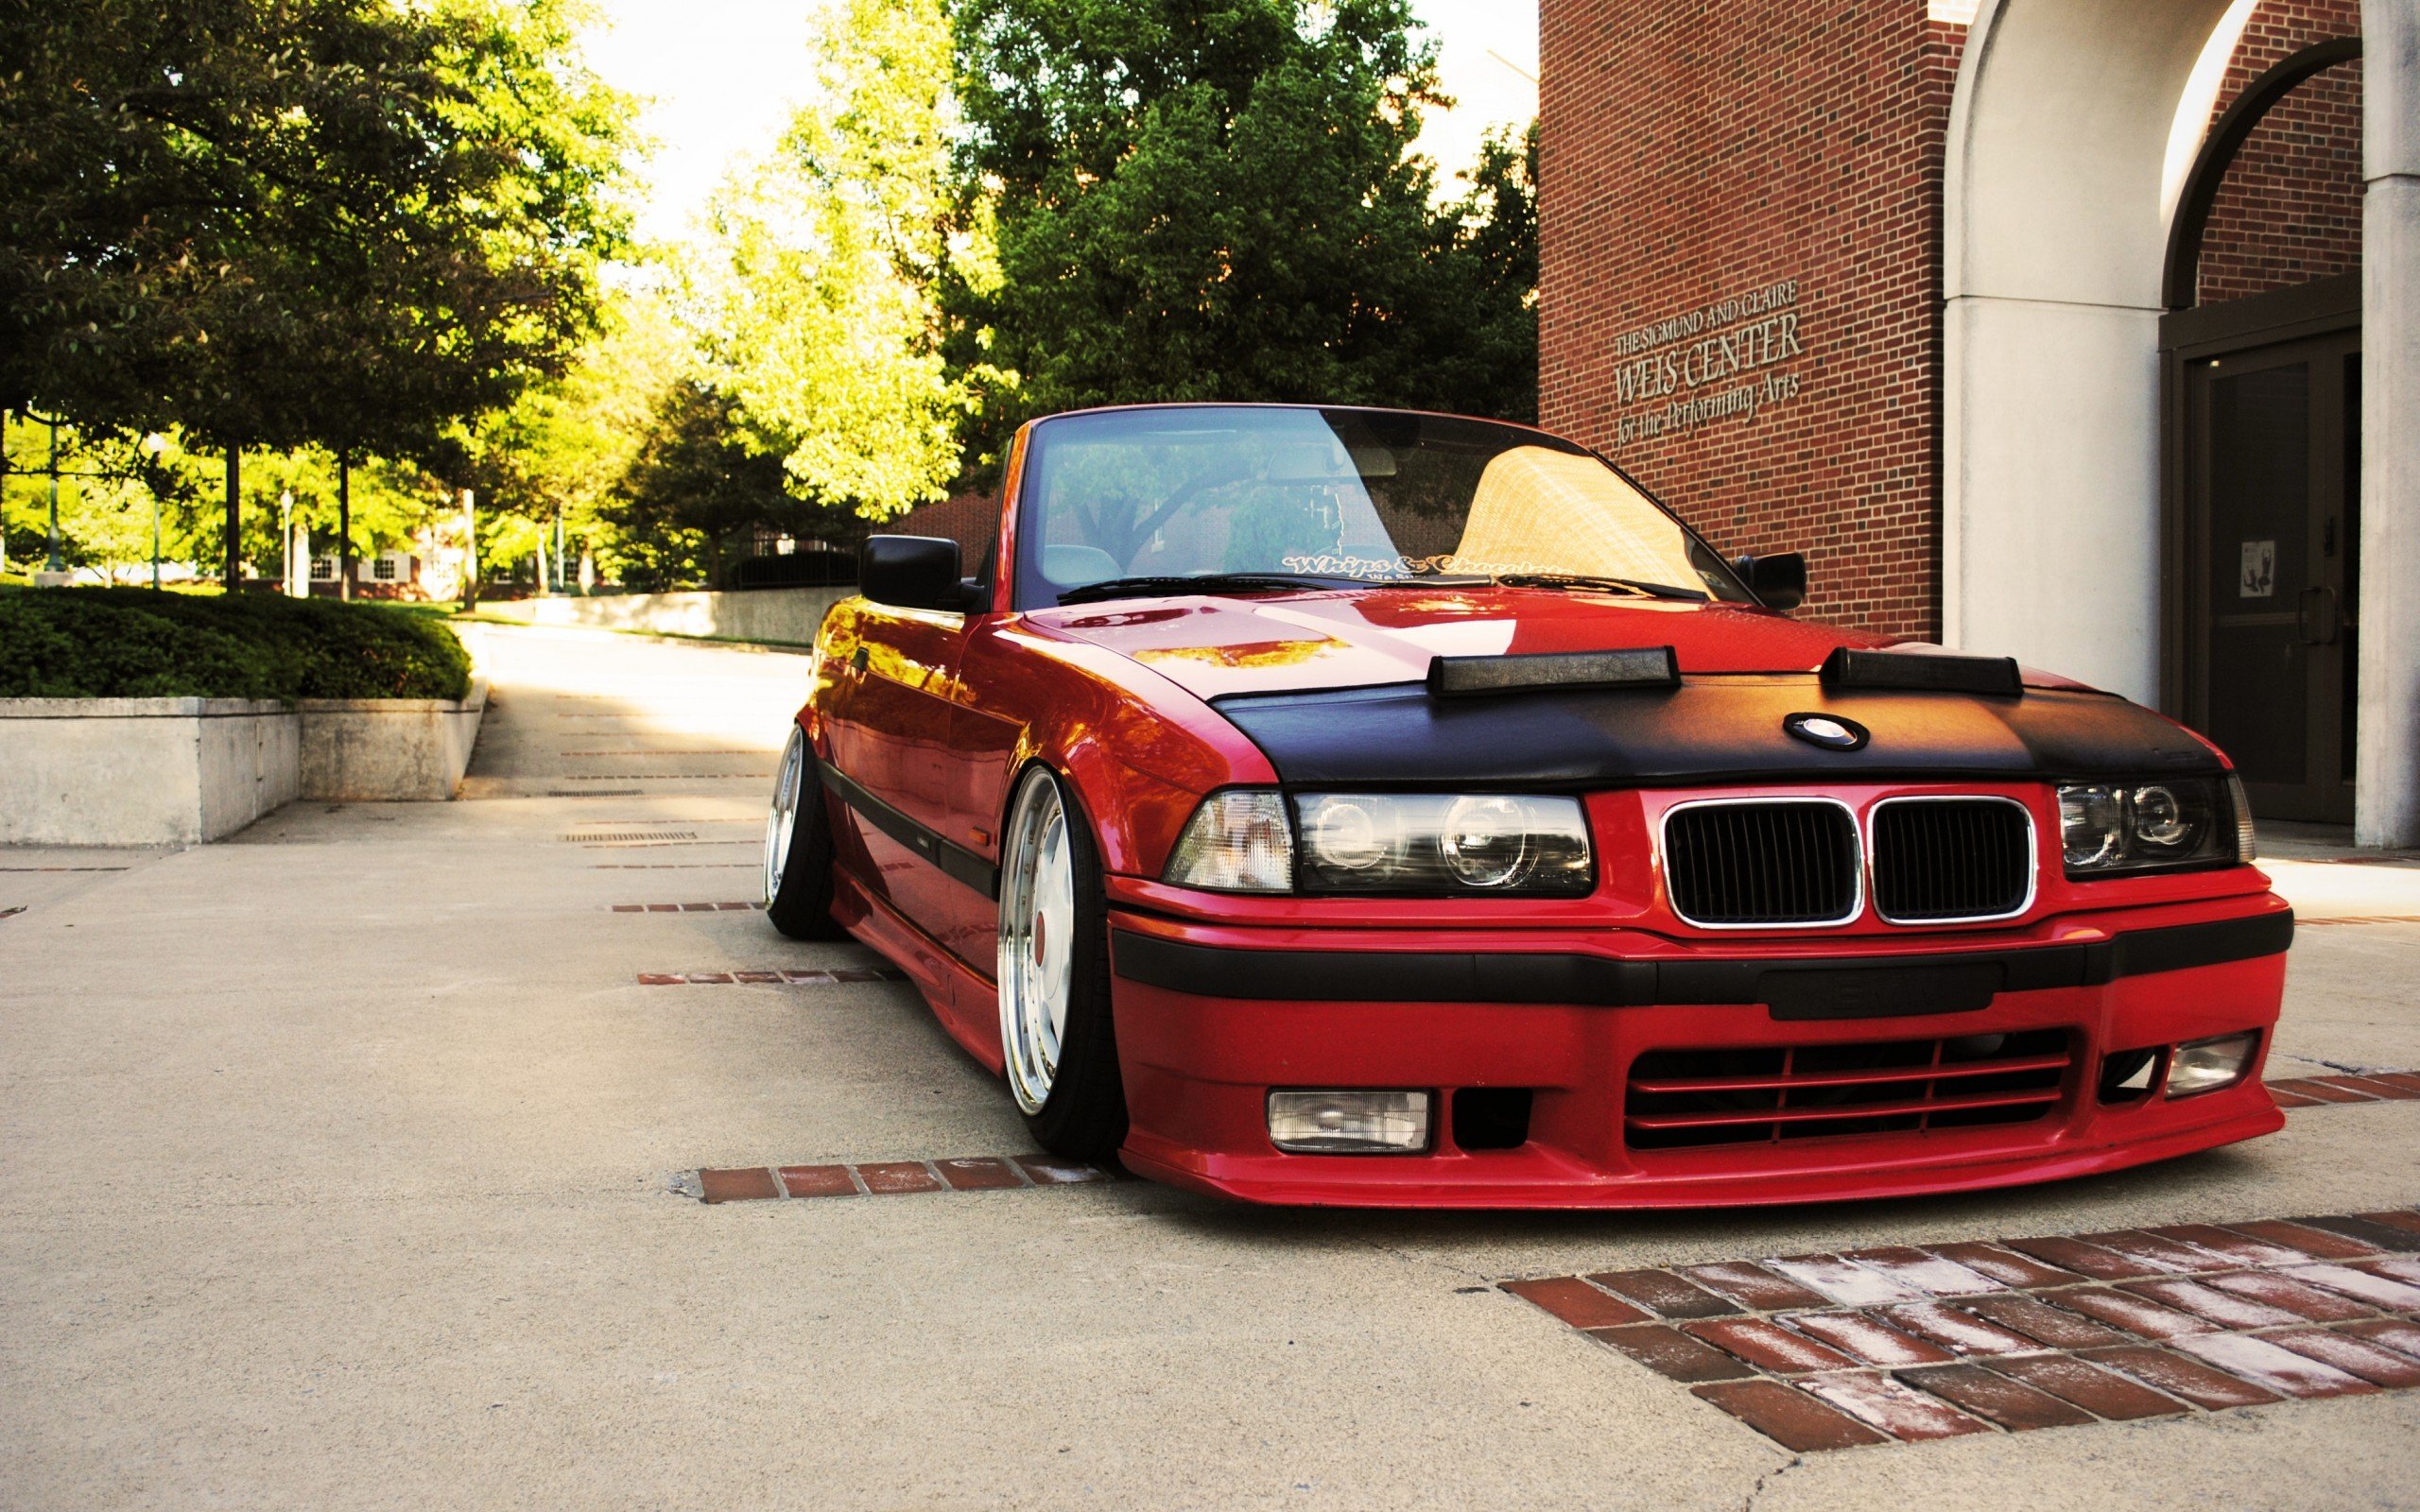 cars, Tuning, Red, Cars, Bmw, 3, Series, Bmw, E36 Wallpaper